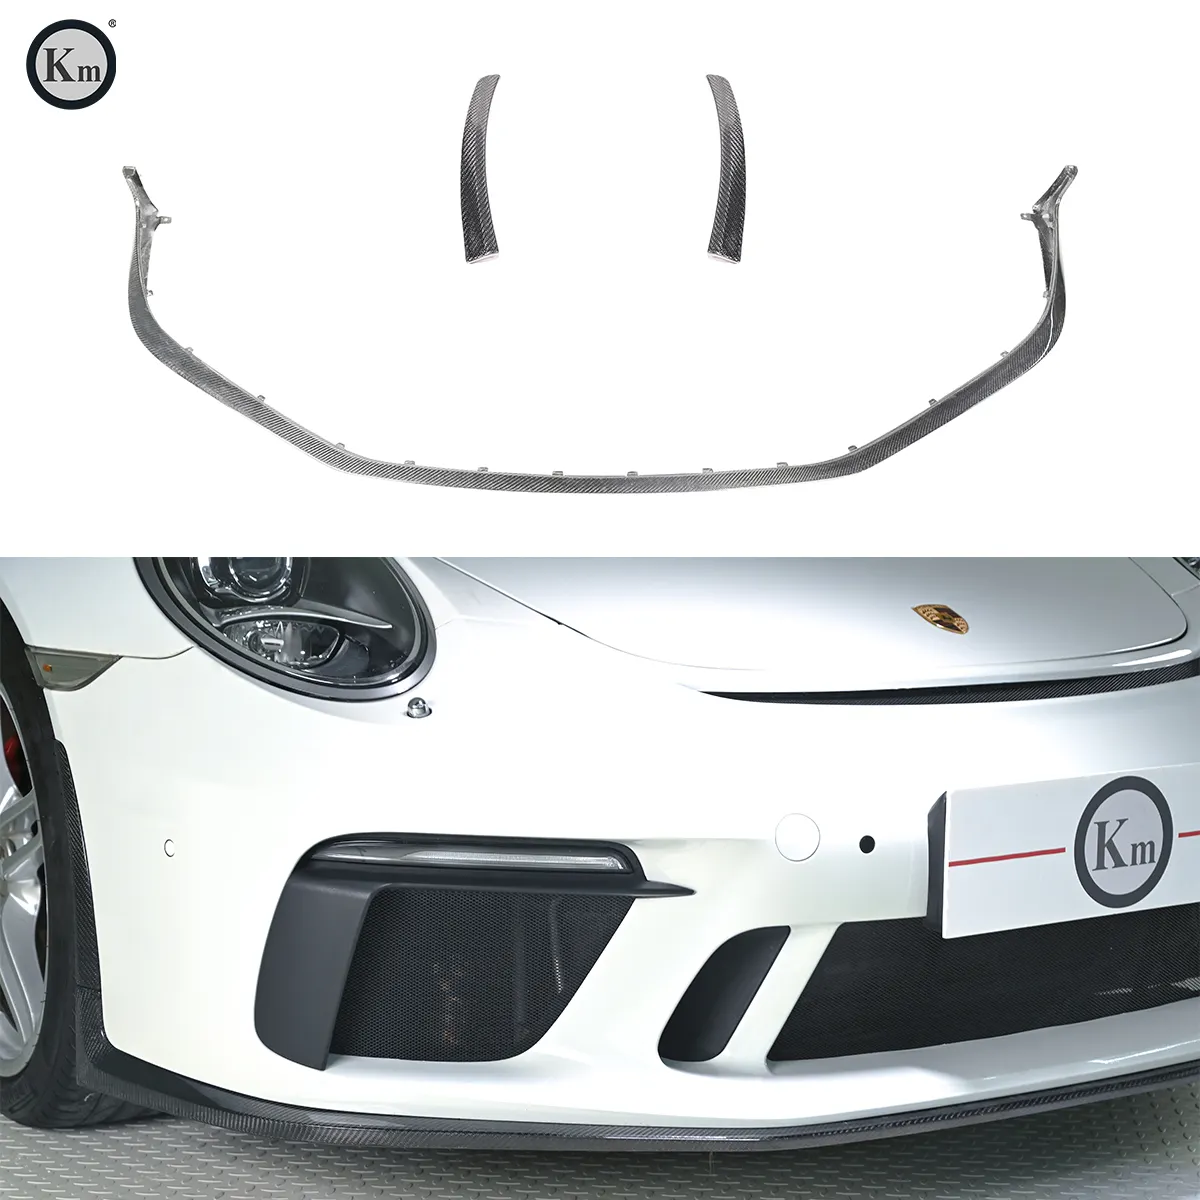 KM for Carrera 2016-2019 year 991.2 GT3 upgrade wet carbon fiber front lip front splitter front spoiler GT3 style